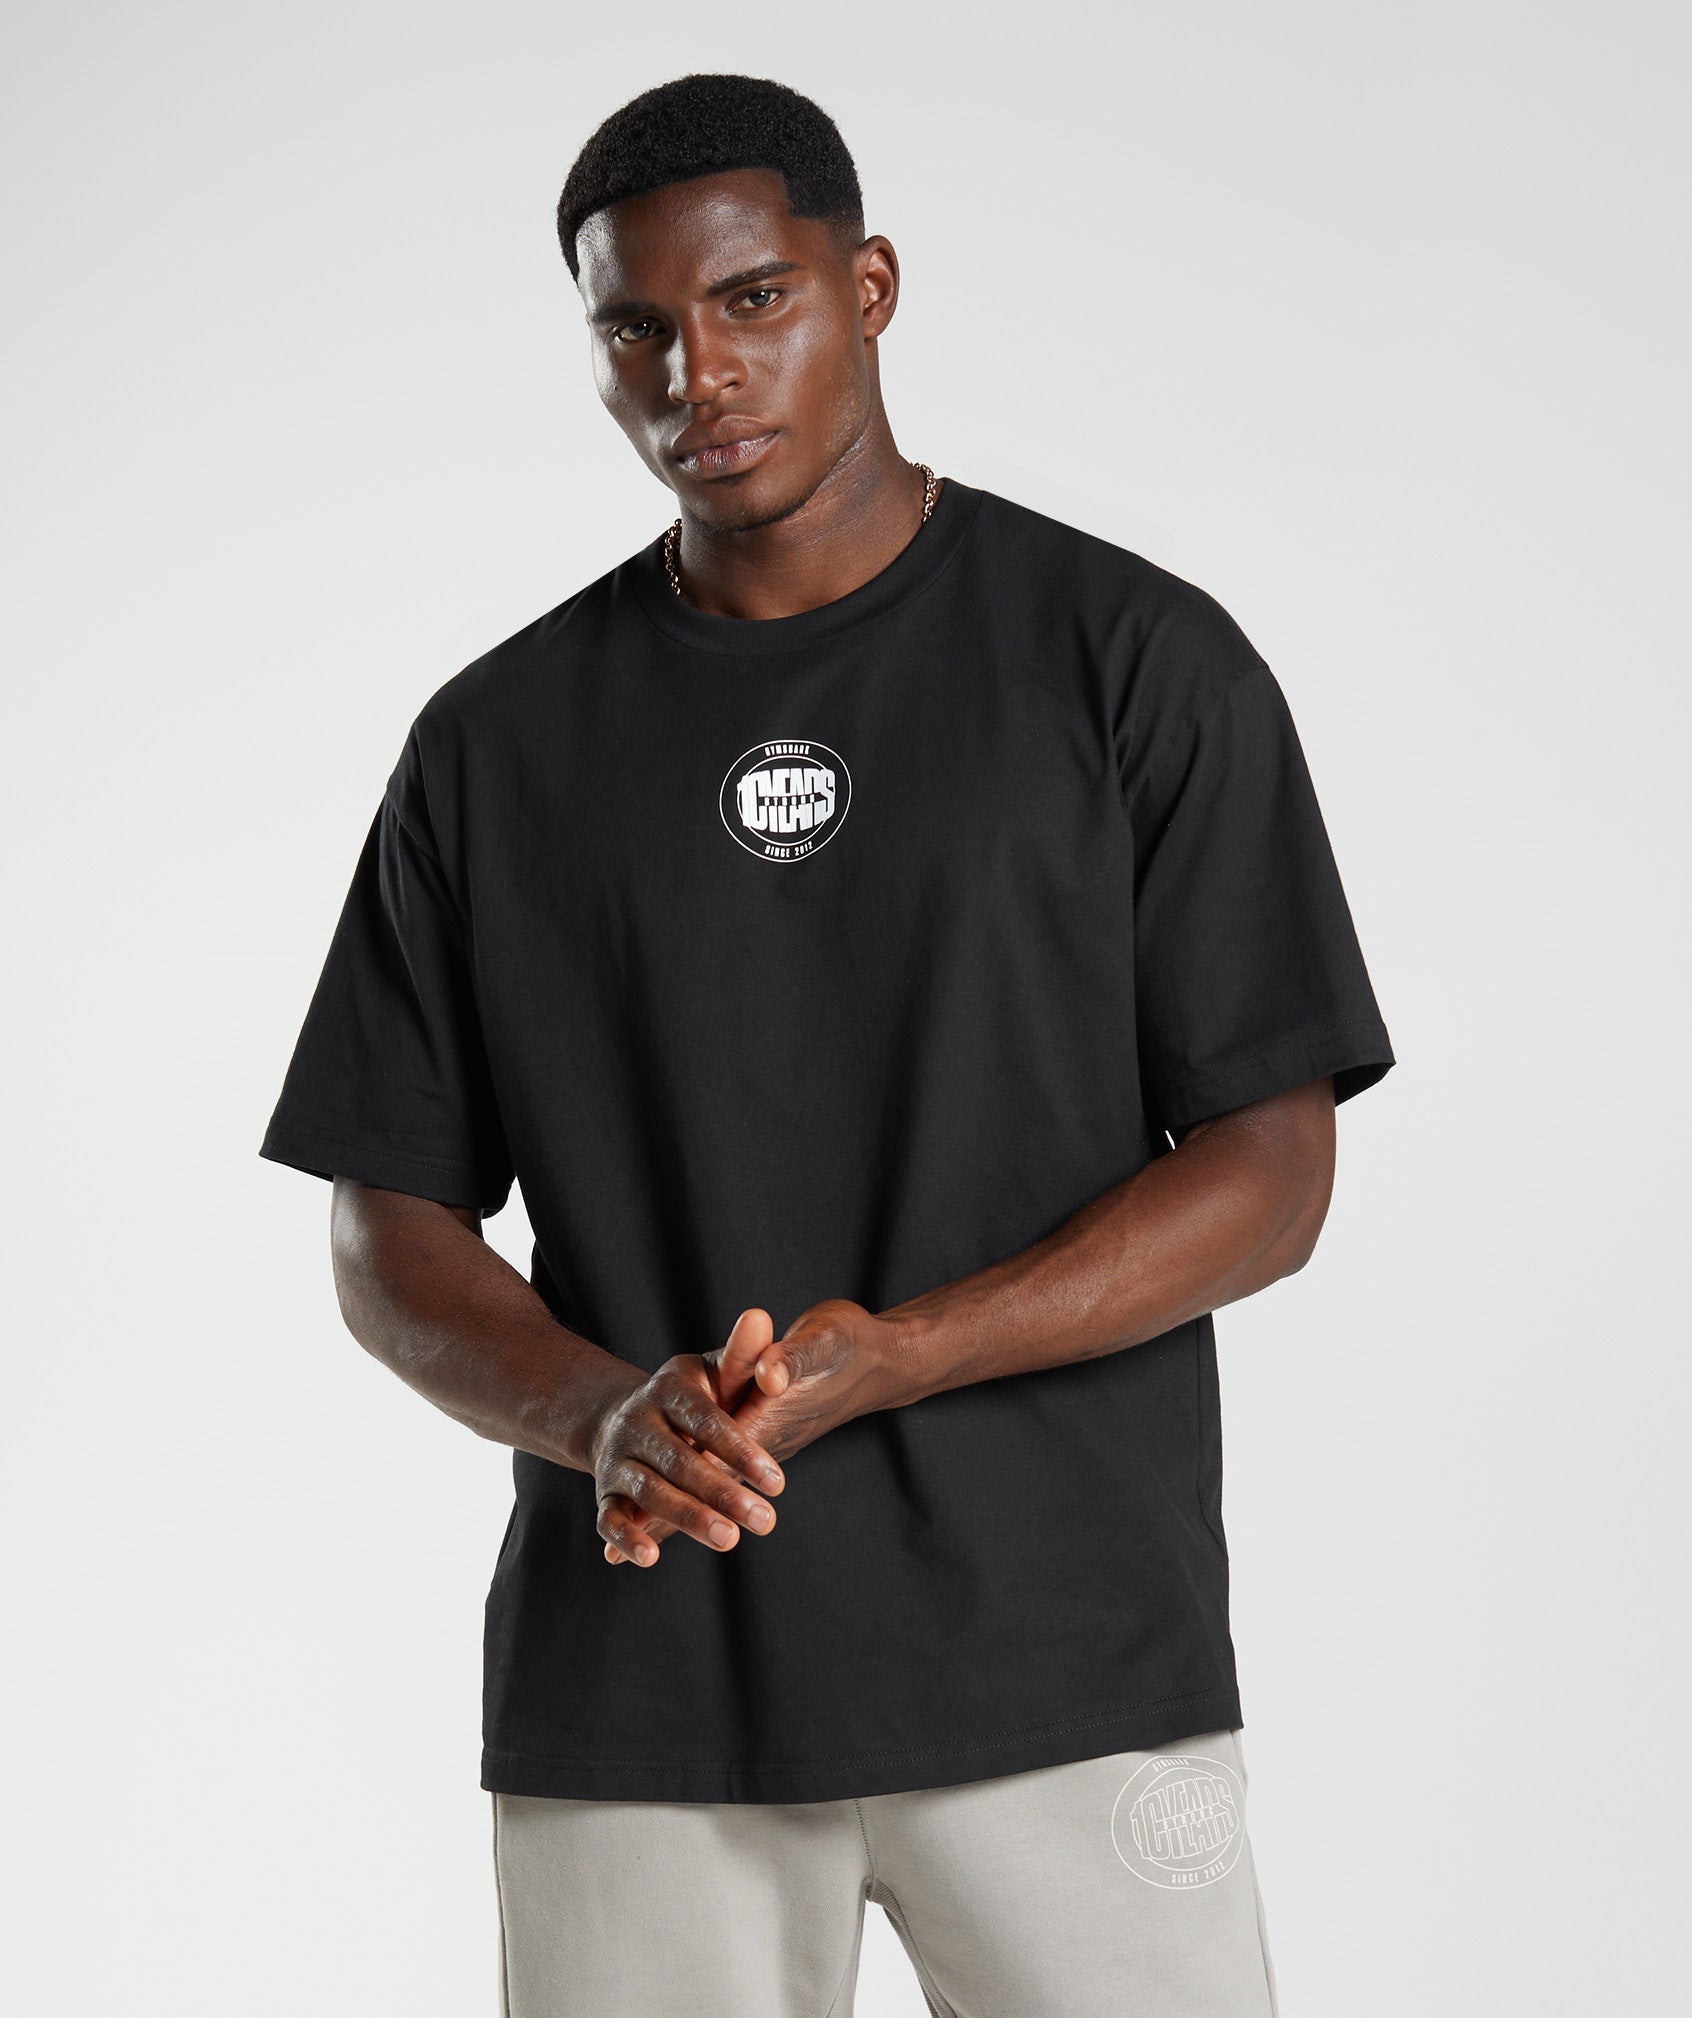 GS10 Year Oversized T-Shirt in Black - view 2